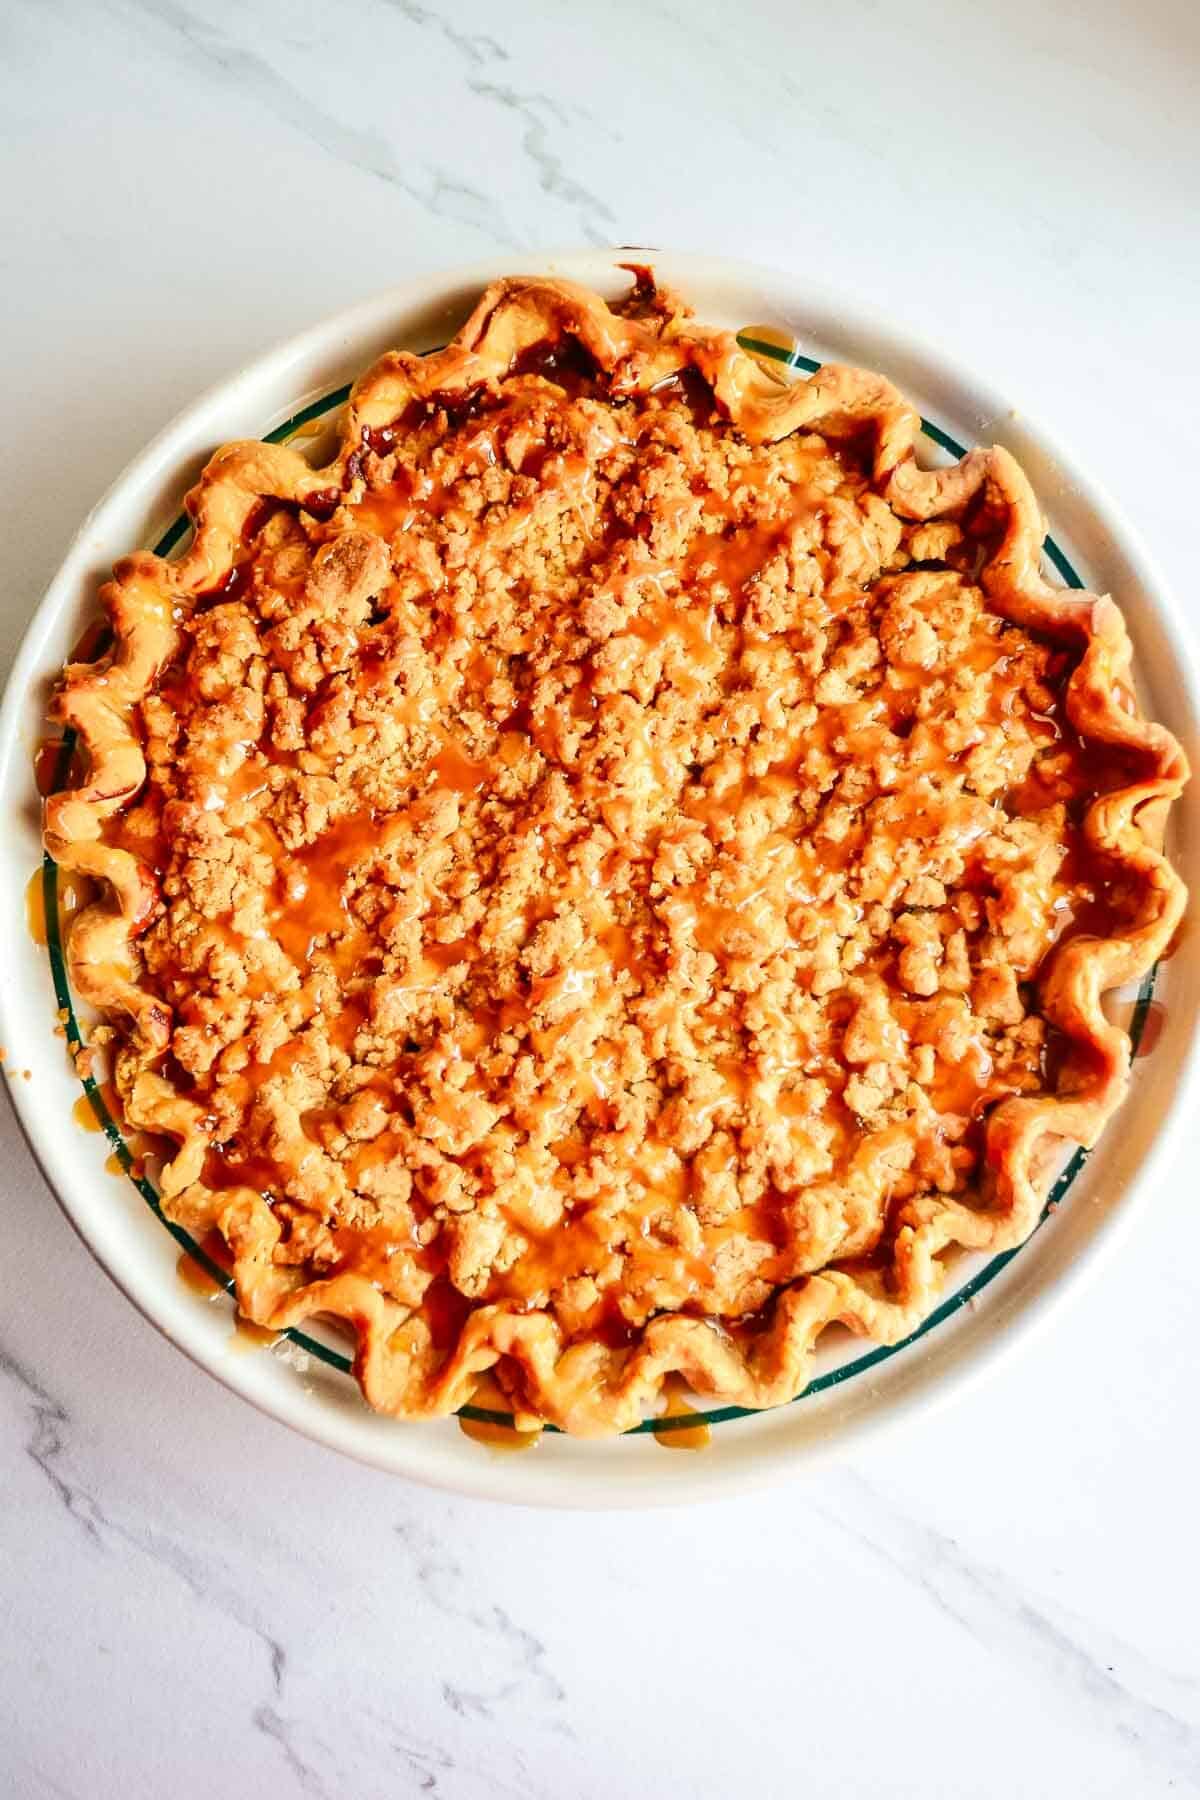 Pie shell filled with caramel apples with the crumb topping after being baked and drizzled with caramel sauce.